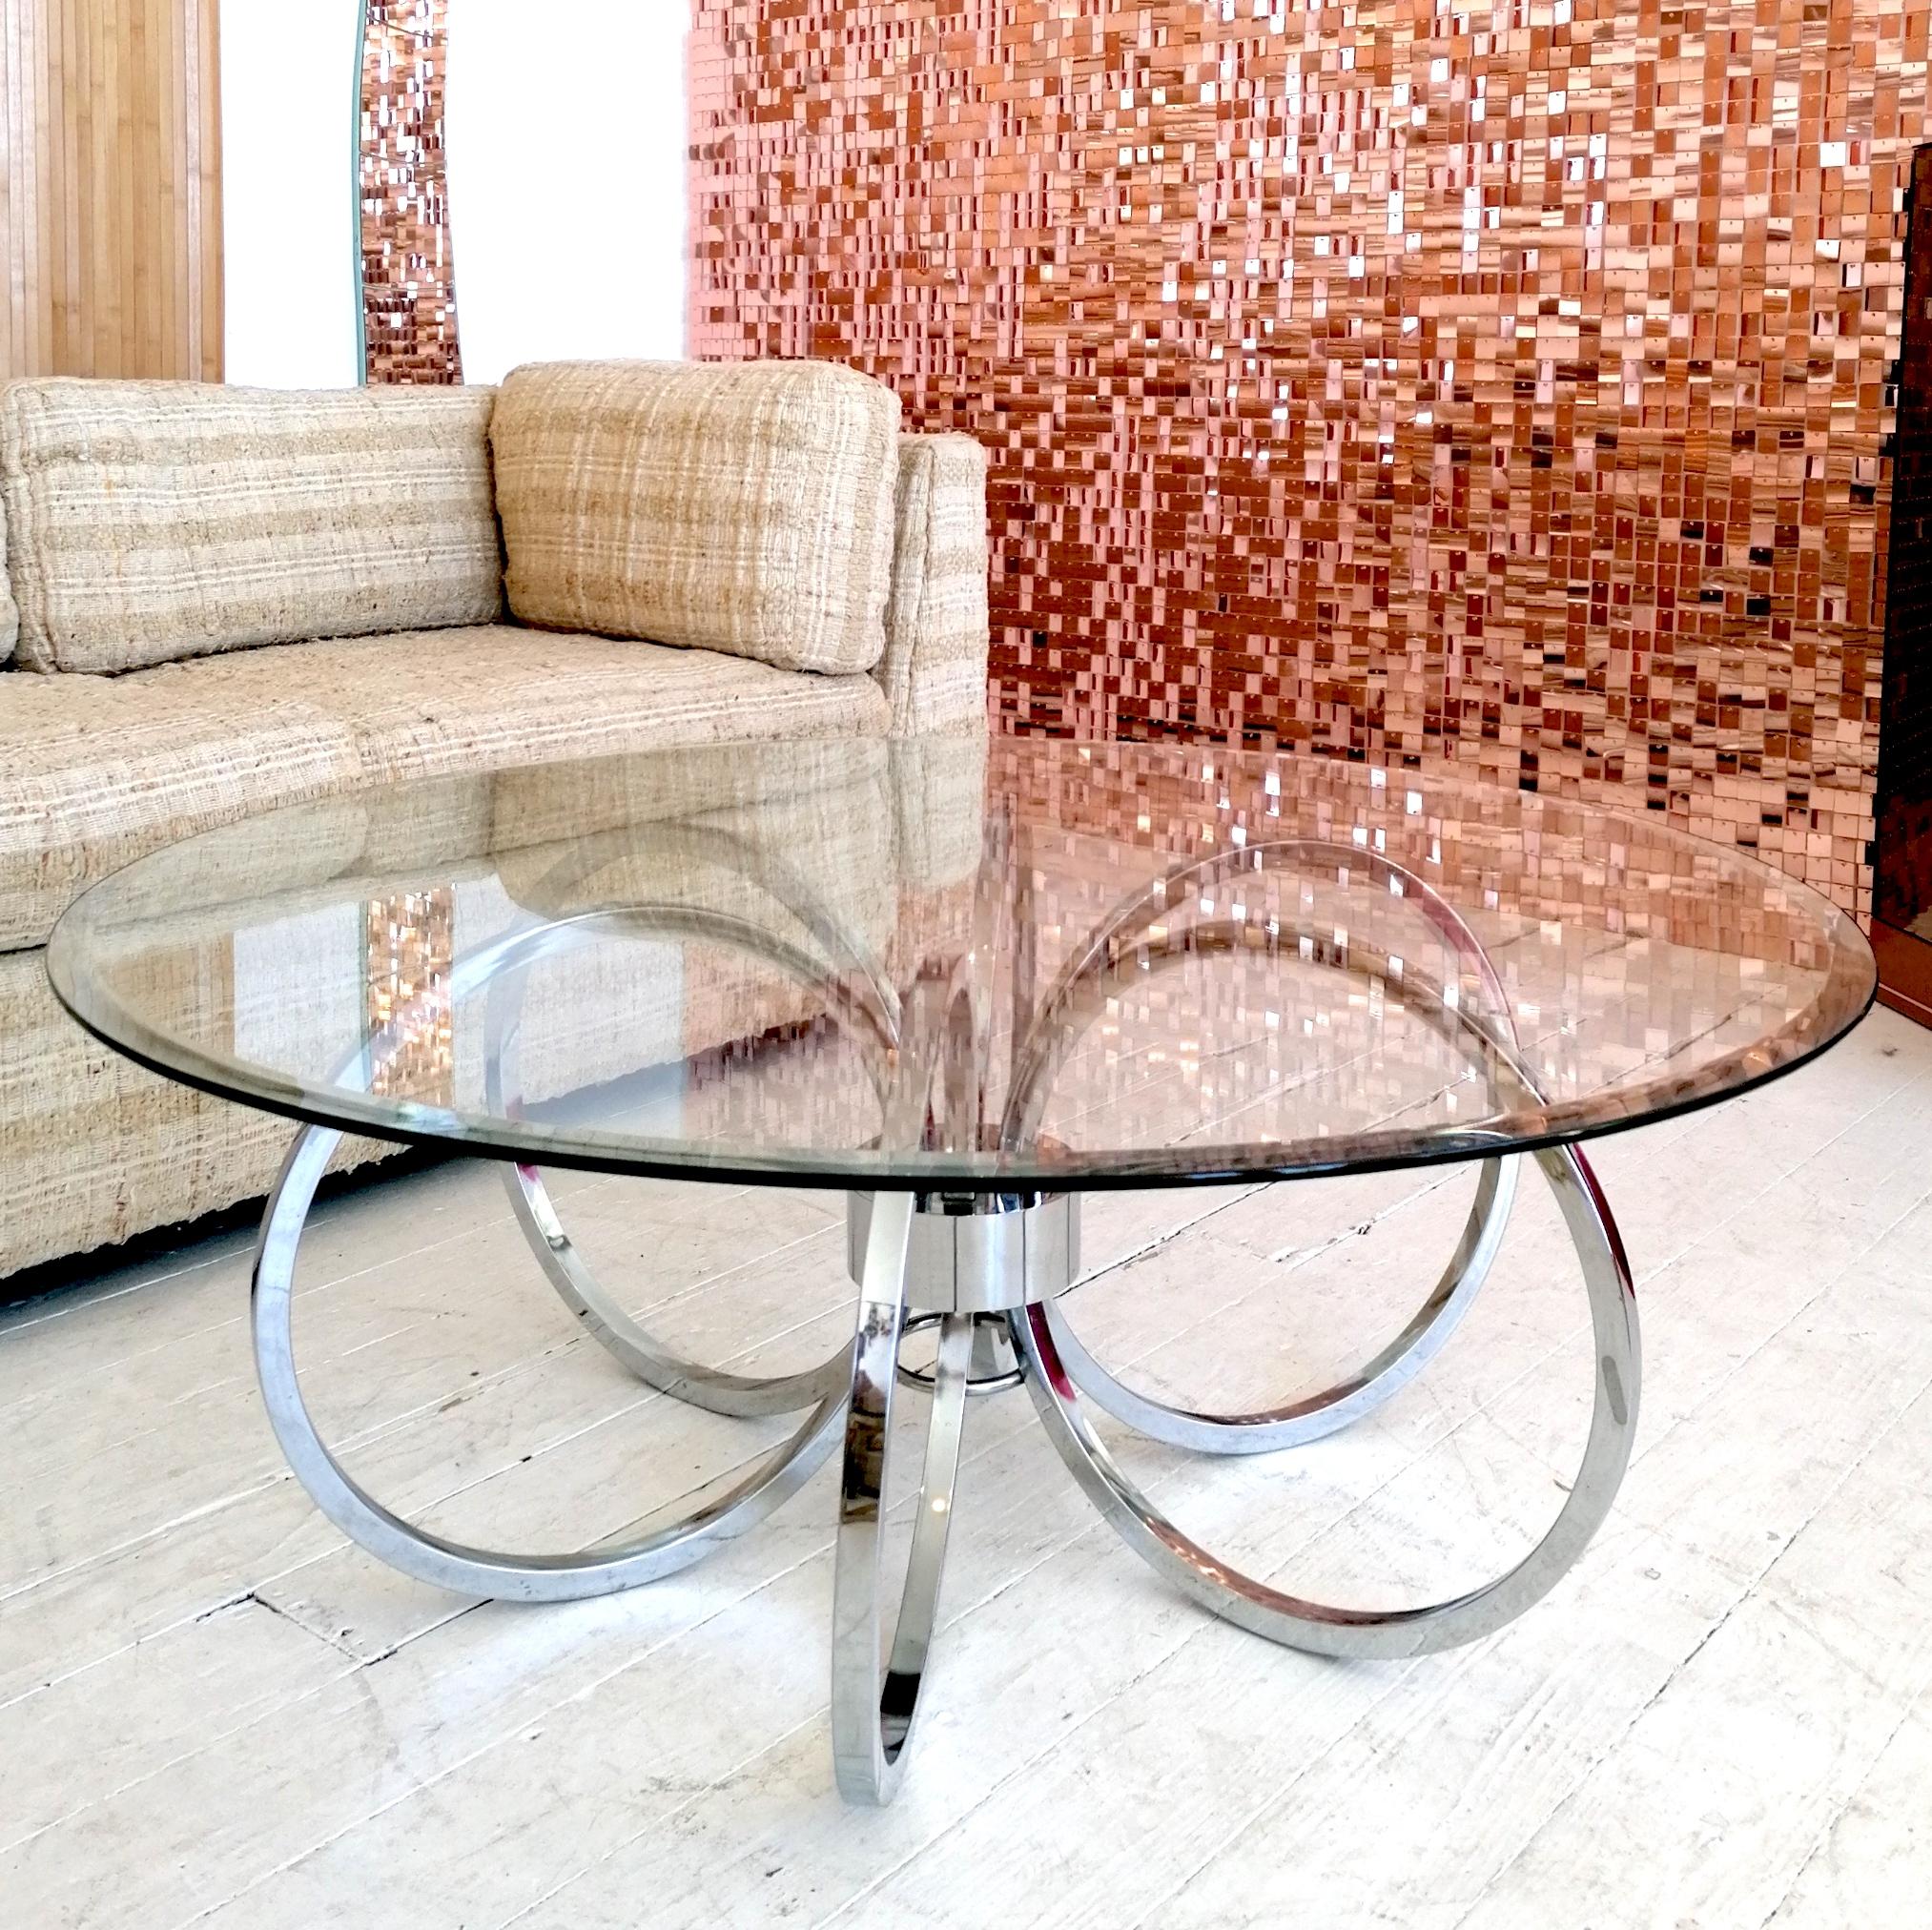 Stylish large Milo Baughman for Design Institute Of America attributed (no label) chrome rings coffee table with bevelled glass top.
USA, 1970s.
In great condition.